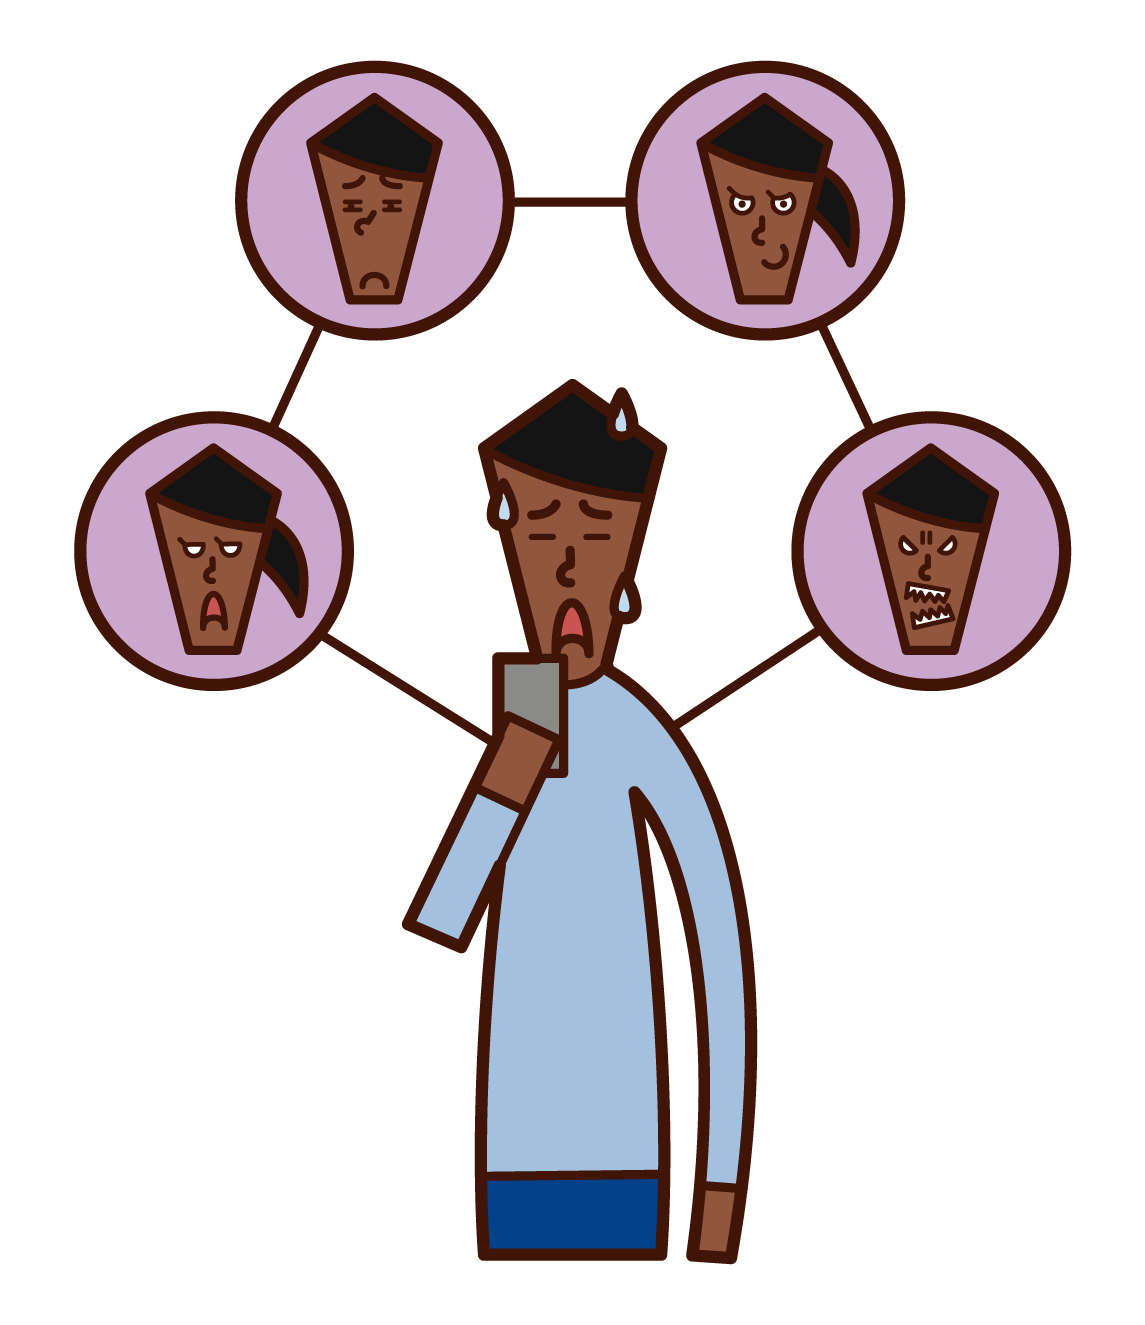 Illustration of a man who suffers from human relationships